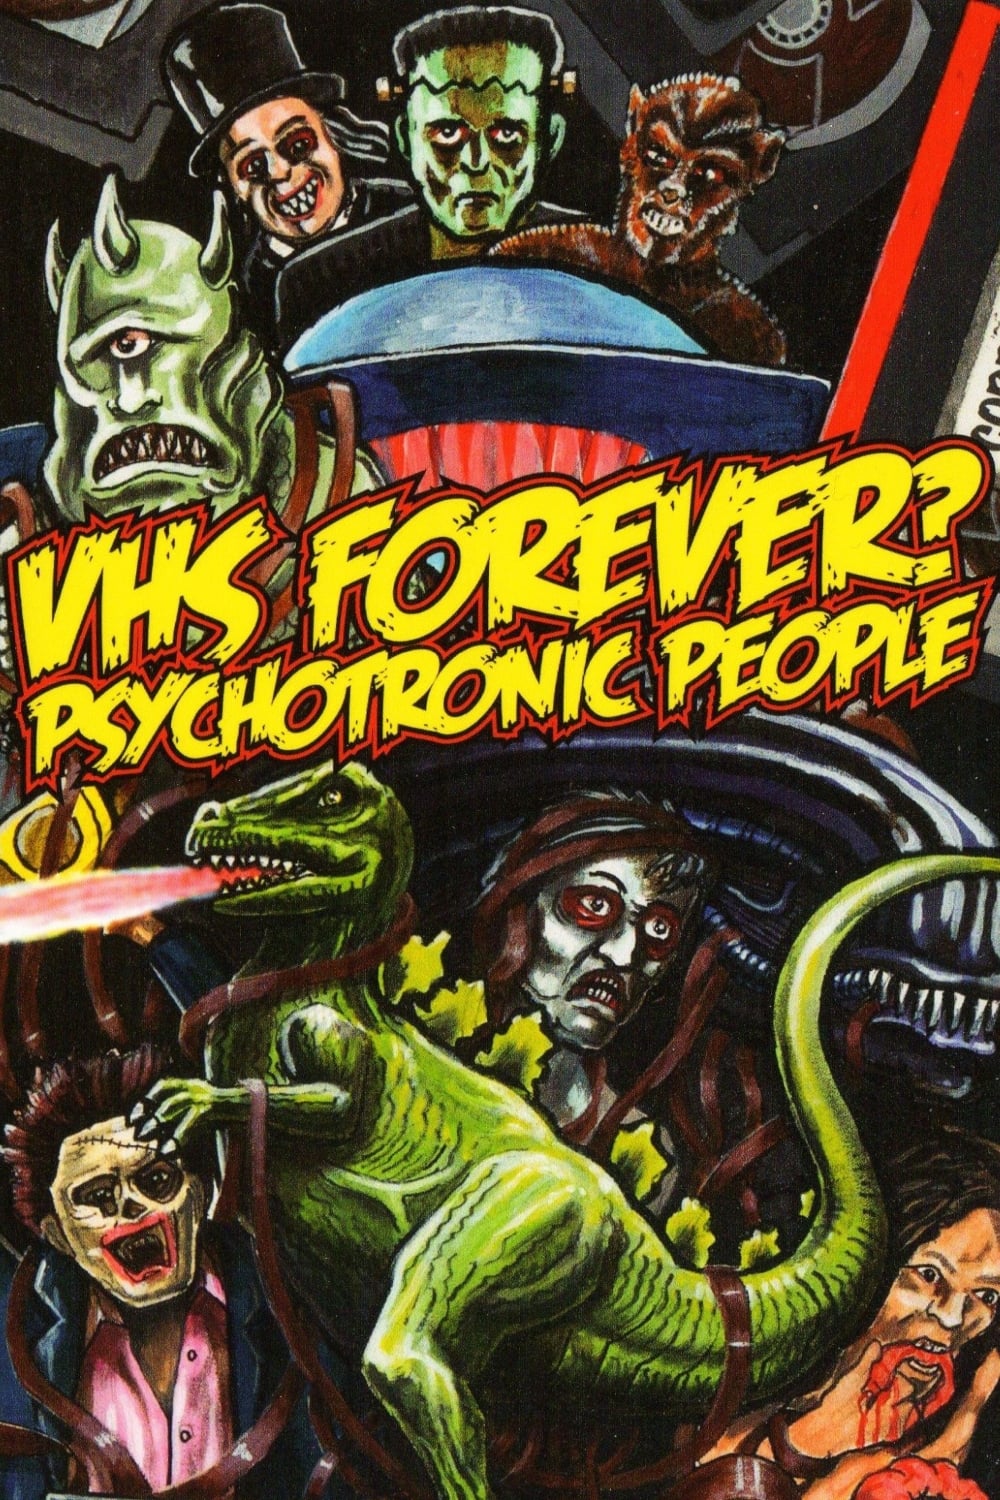 VHS Forever?: Psychotronic People